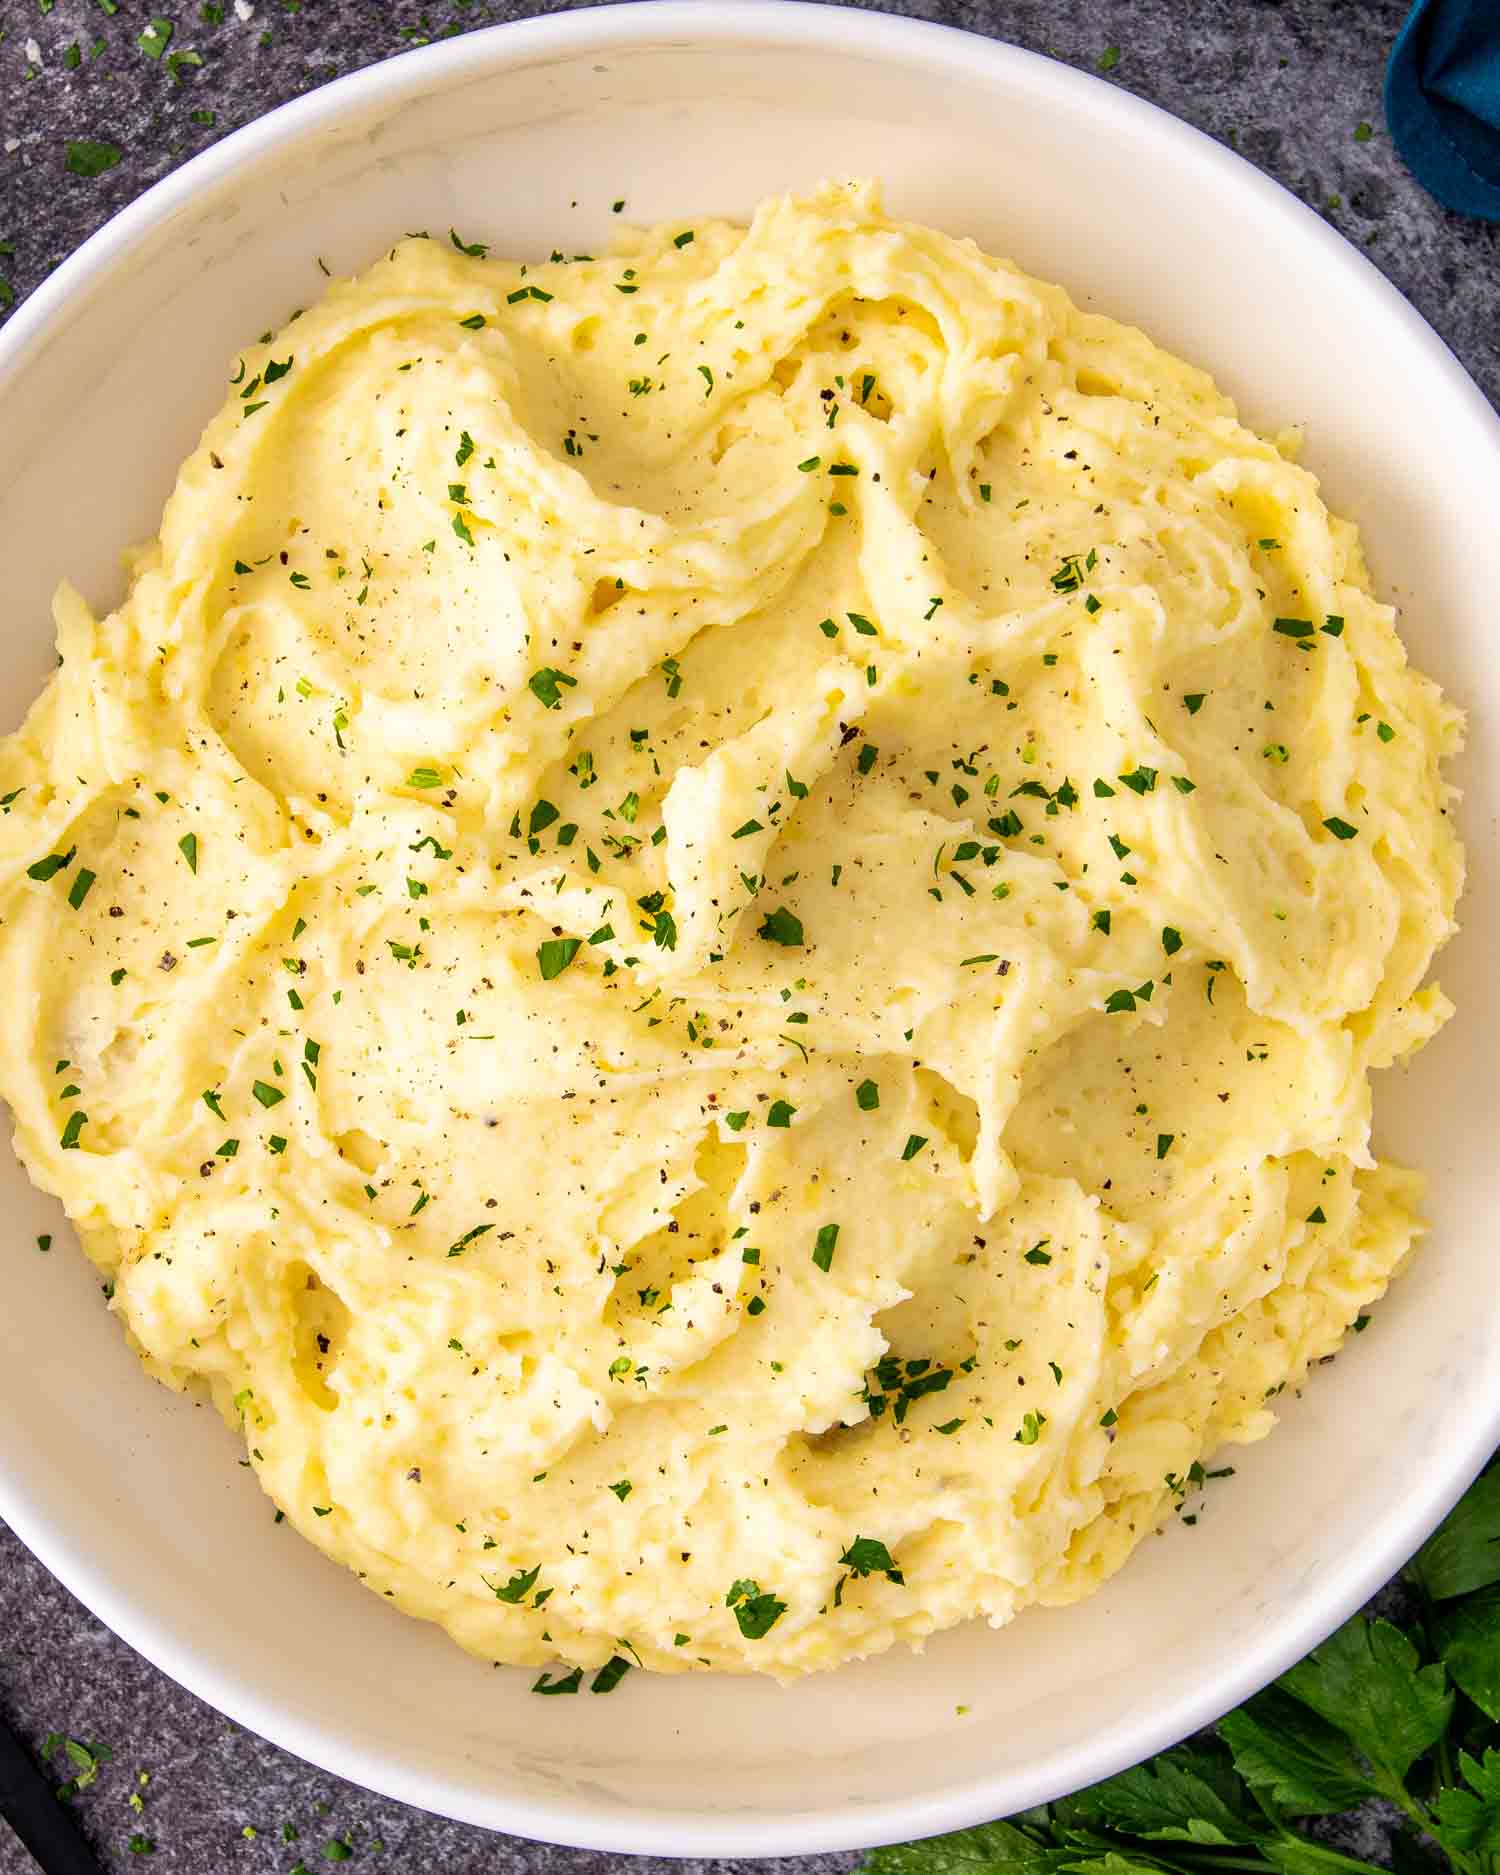 a big white bowl with freshly made mashed potatoes and garnished with a bit of parsley.